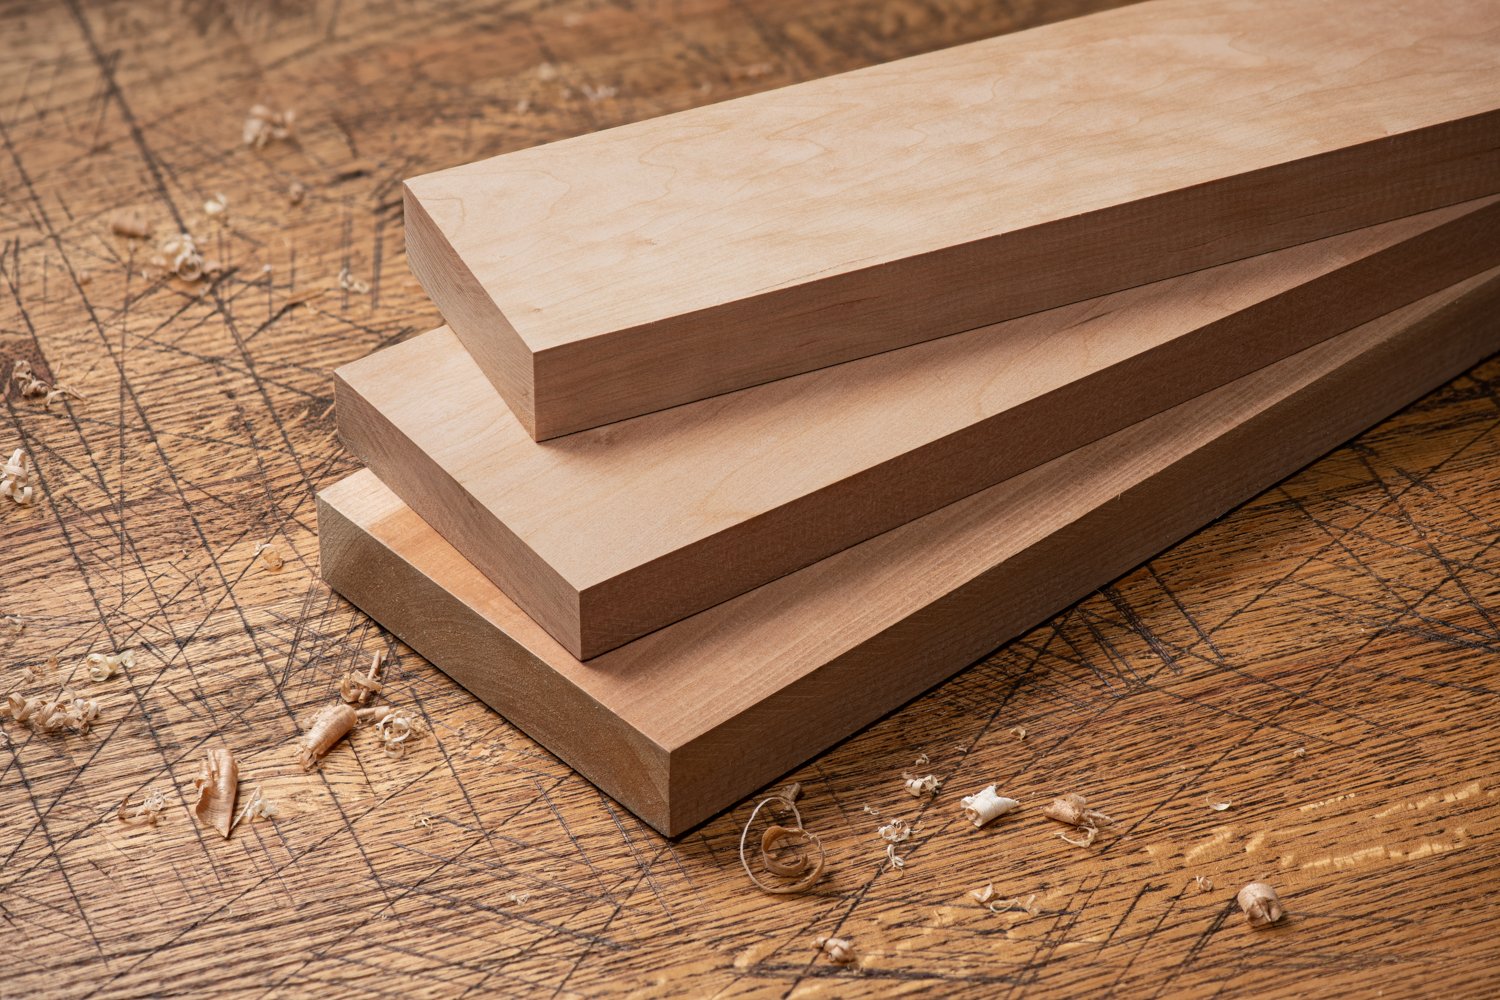 How to Use Cherry Lumber for Woodworking